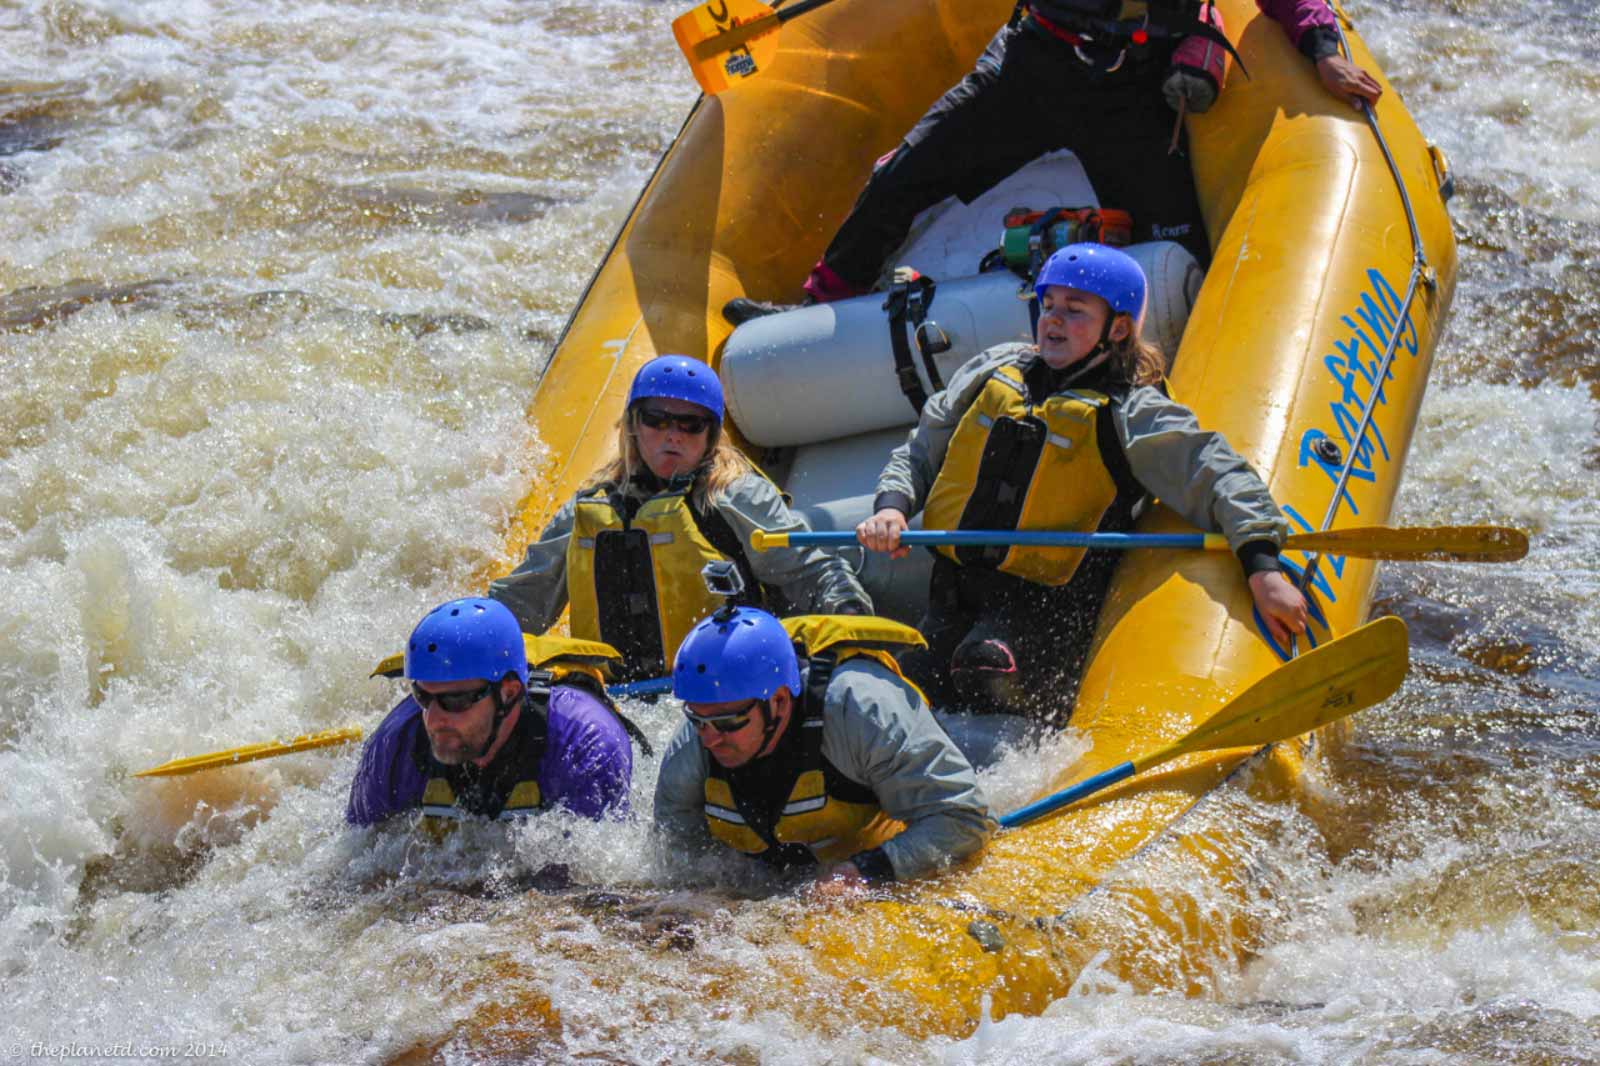 things to do in ontario adventures canada - whitewater rafting